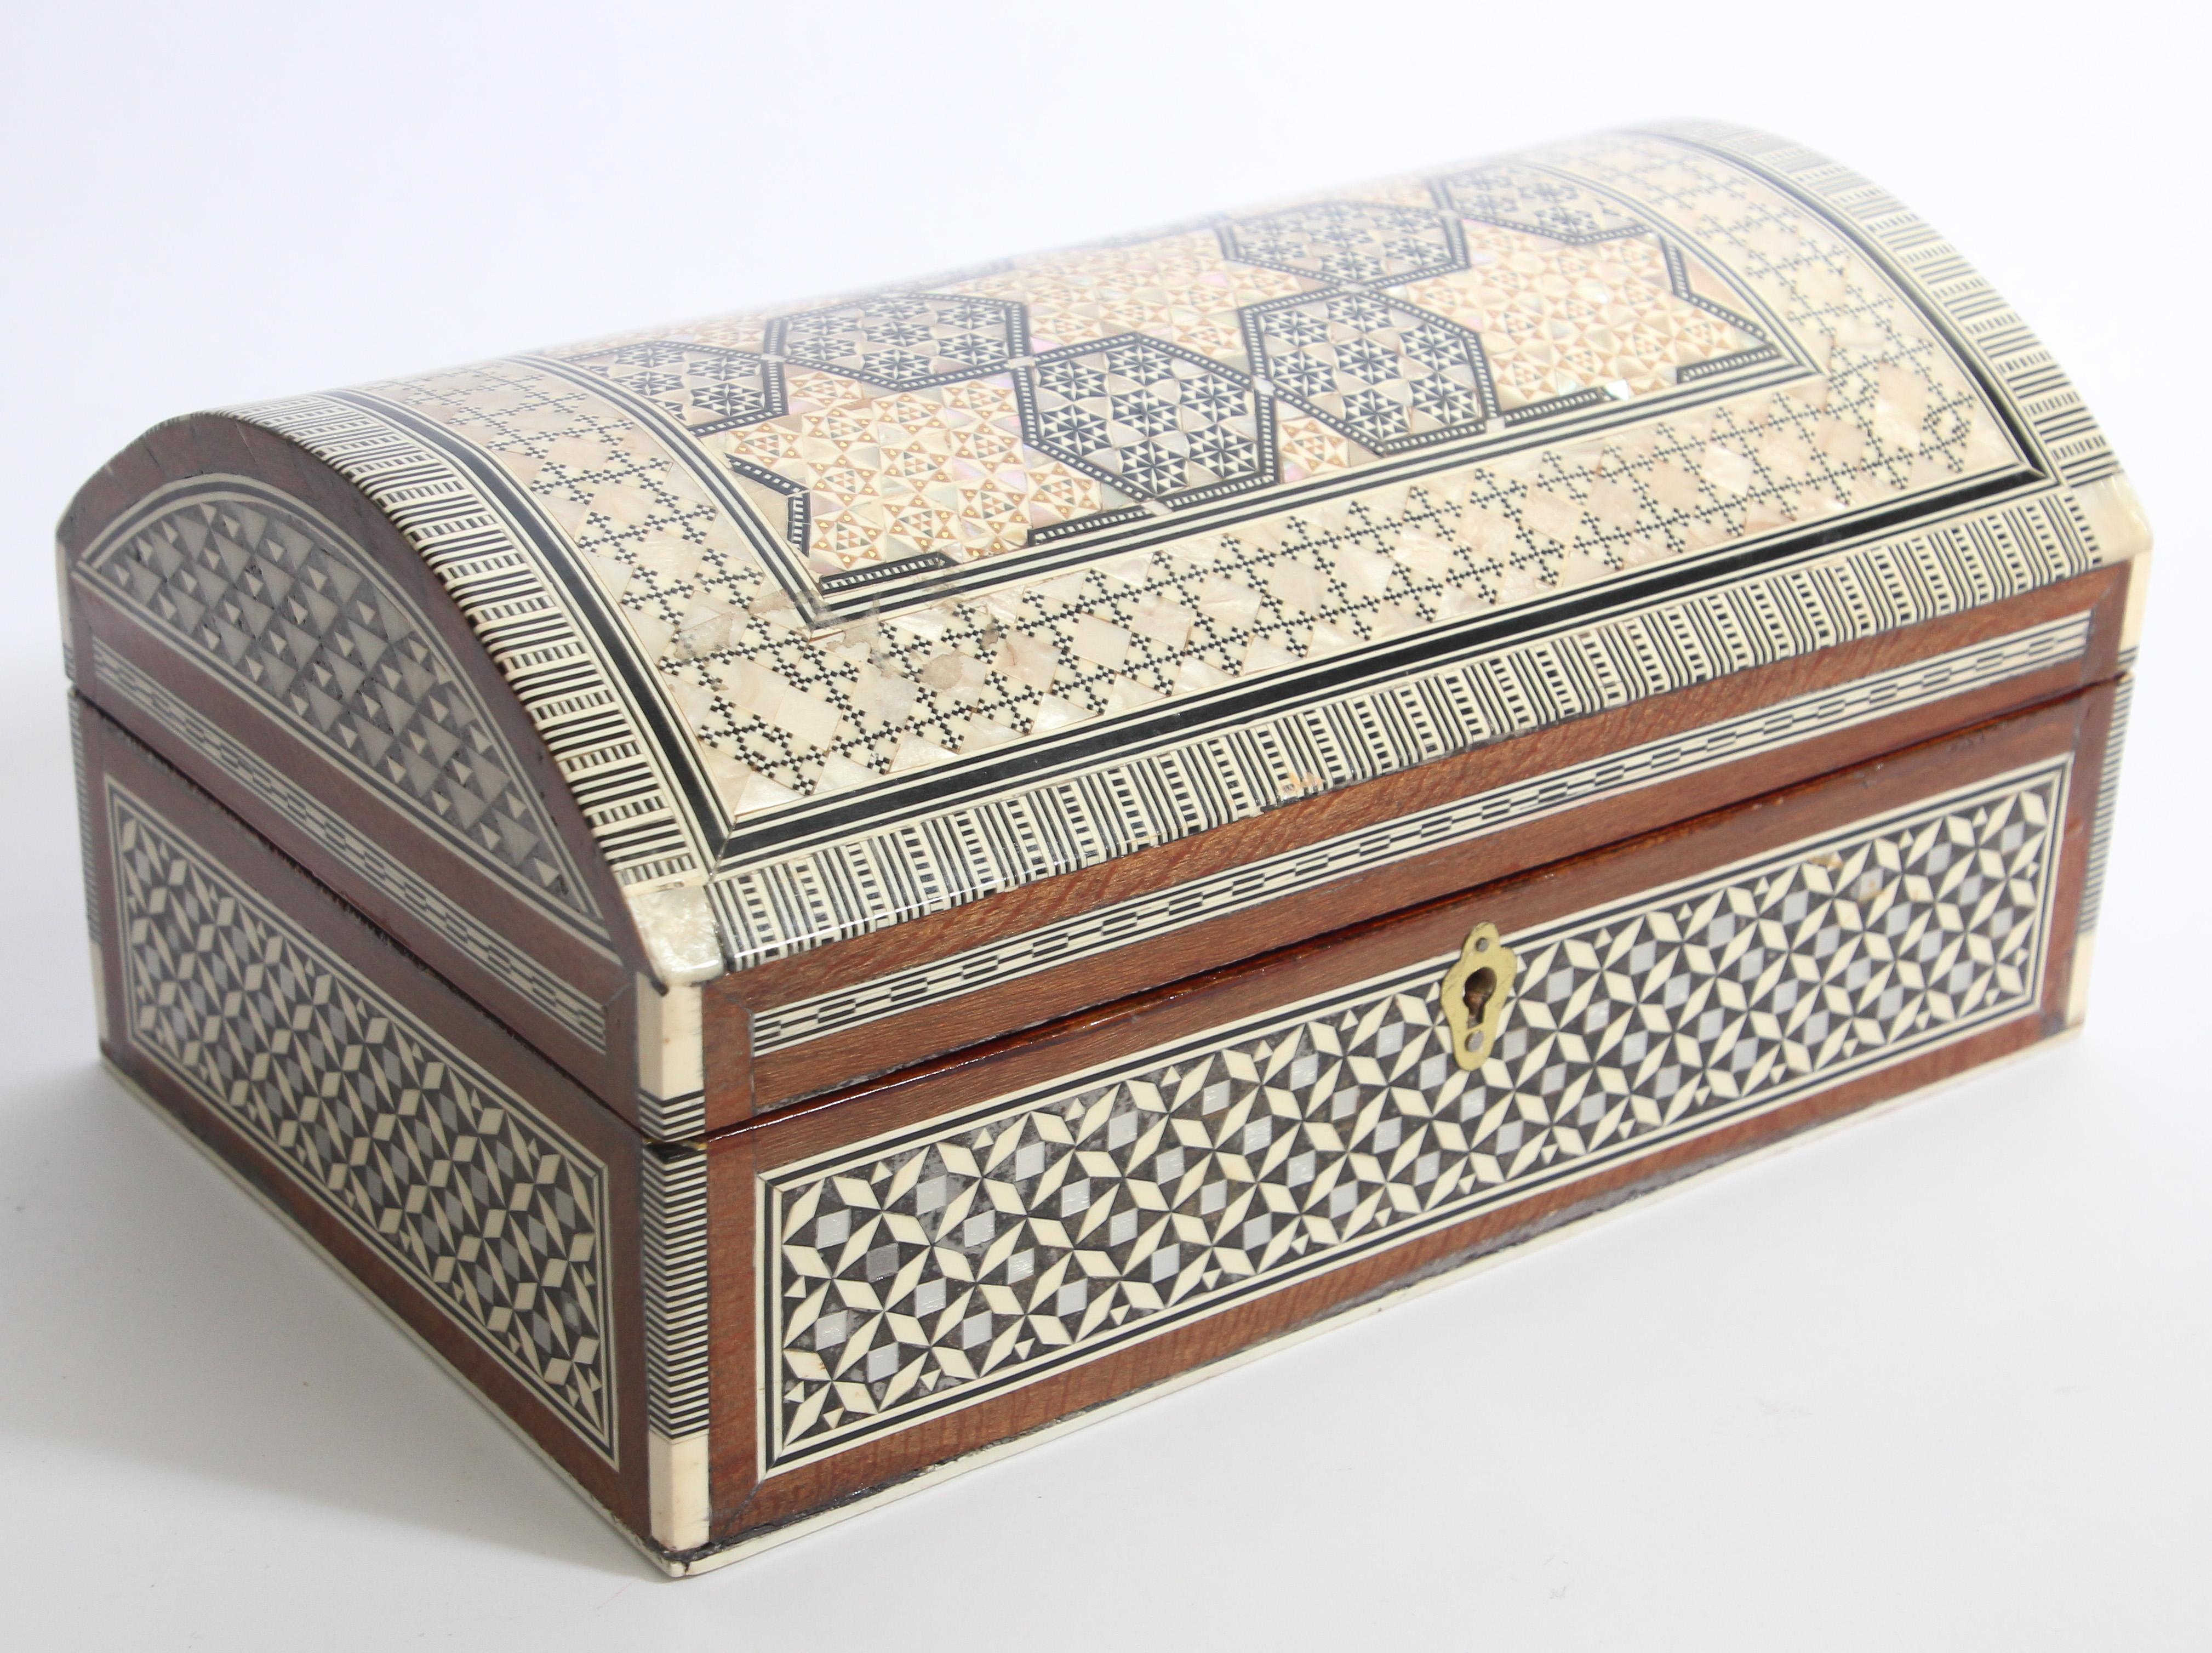 Large exquisite handcrafted Middle Eastern Egyptian mosaic marquetry sadeli inlaid wood jewelry box.
Dome chest intricately decorated with Moorish motif designs which have been painstakingly inlaidmosaic marquetry in different fruitwoods.
Moorish